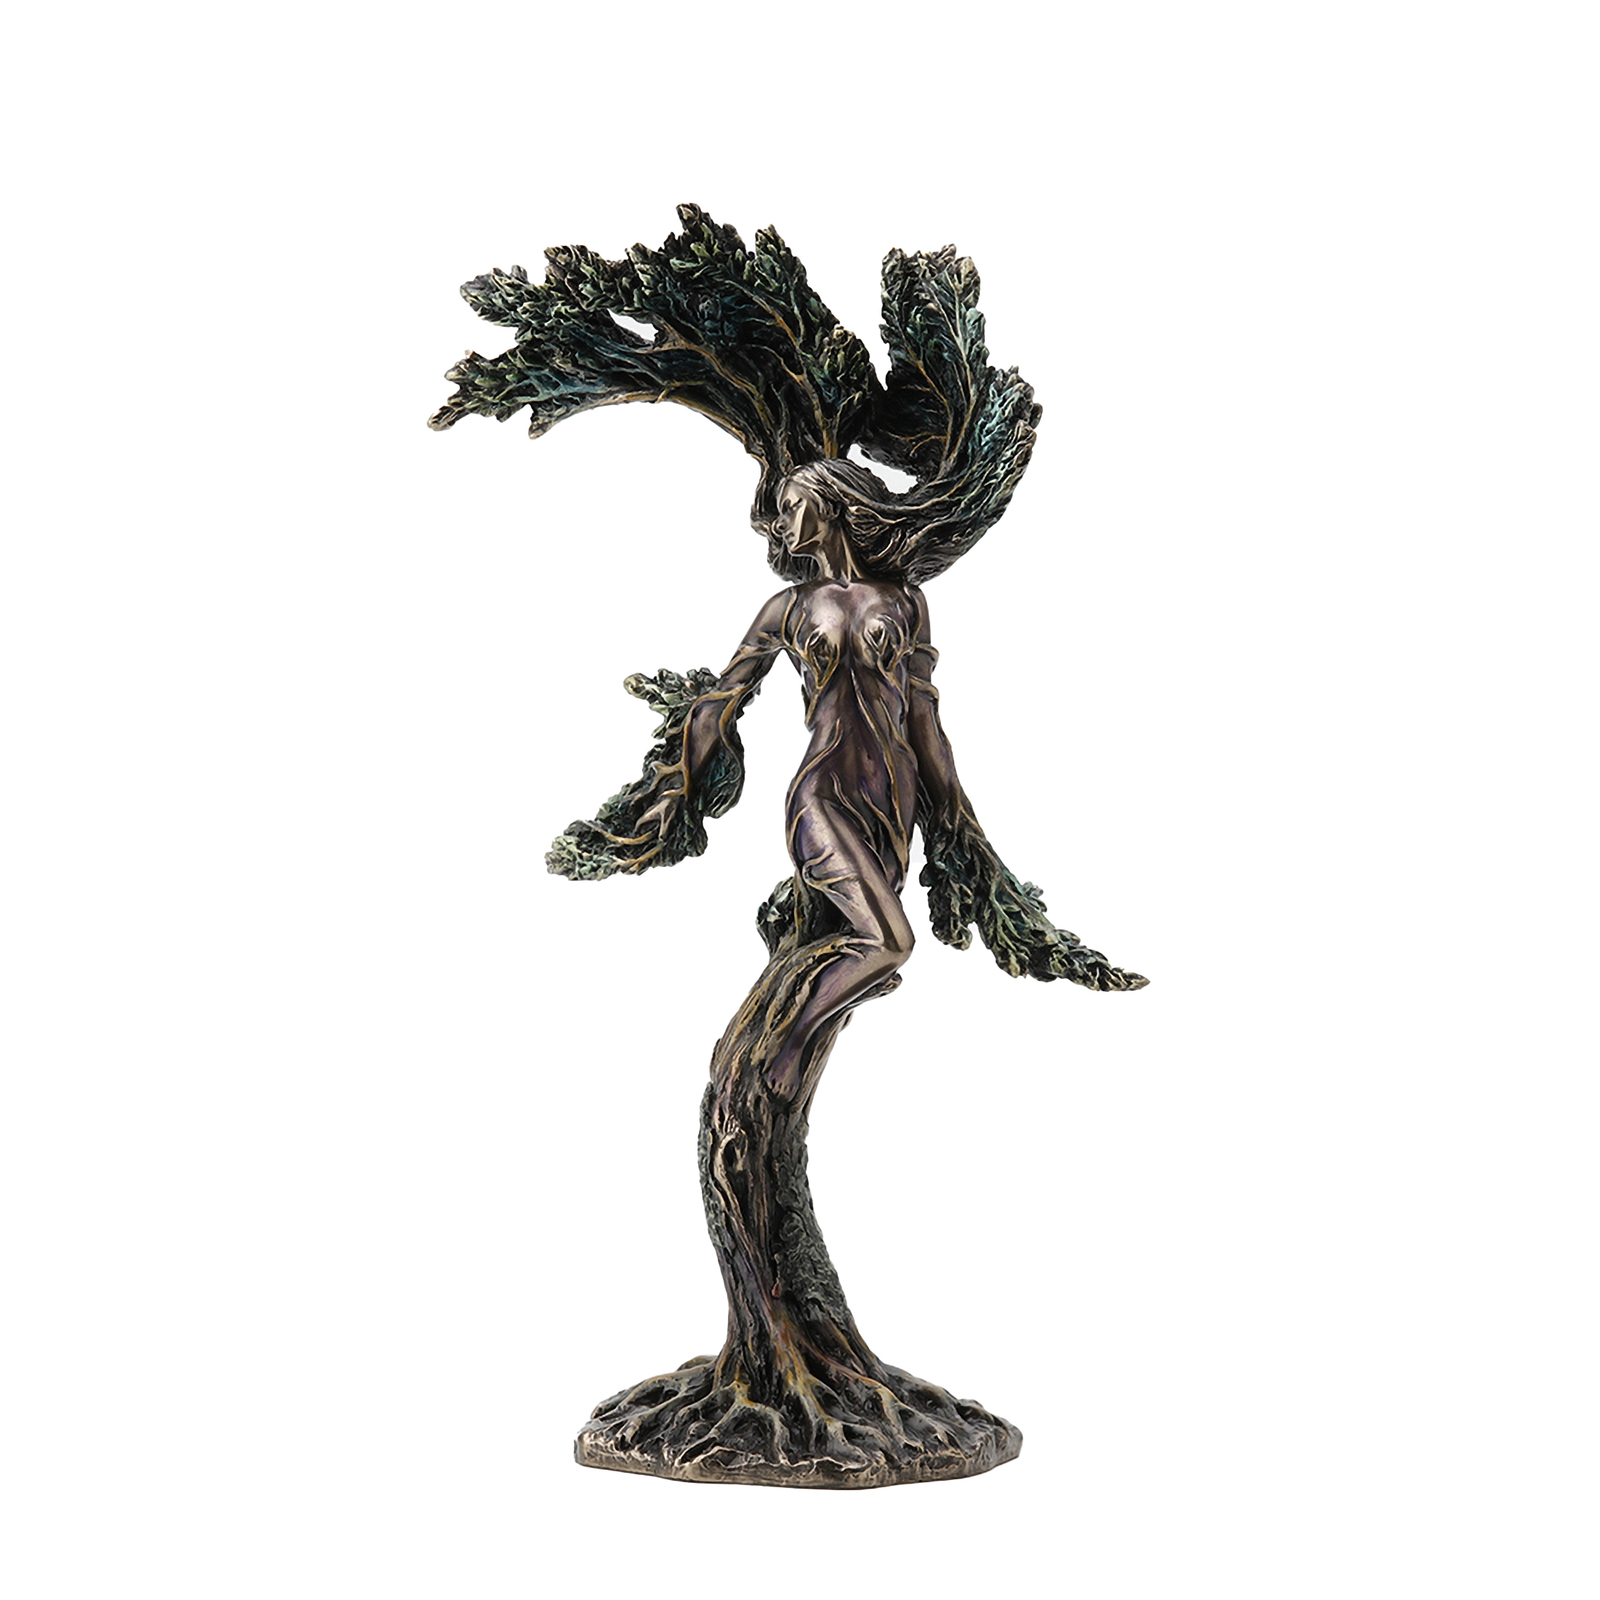 Primary image for Bronze Finished Meliae The Forest Nymph Statue Greek Mythology